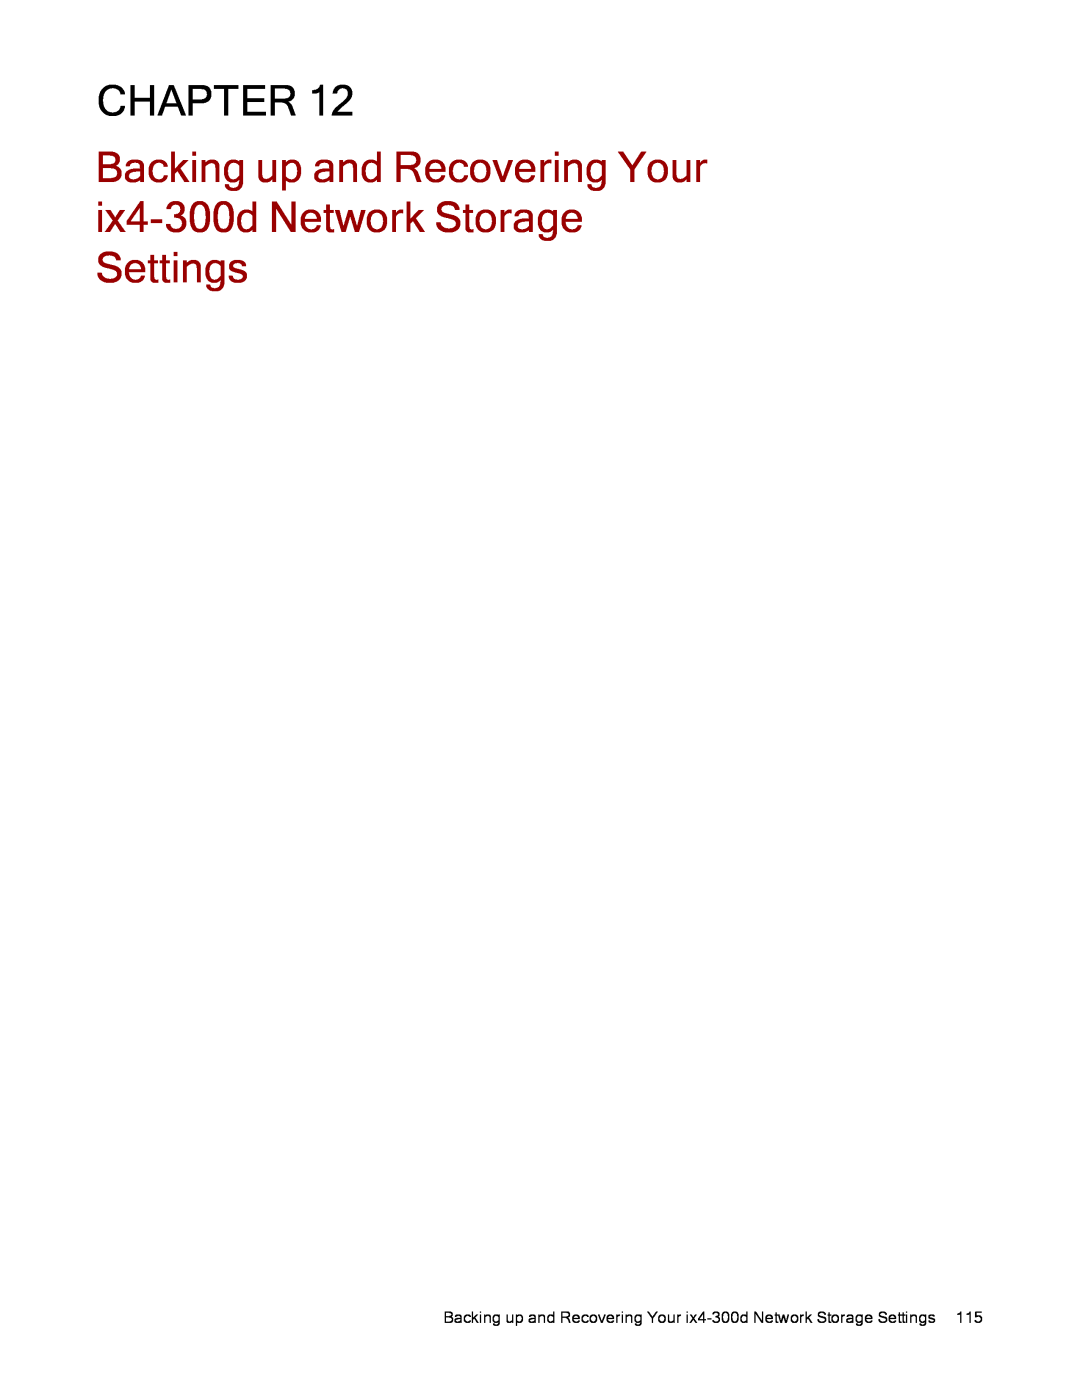 Lenovo 70B89000NA, 70B89003NA, 70B89001NA manual Backing up and Recovering Your ix4-300d Network Storage Settings, Chapter 